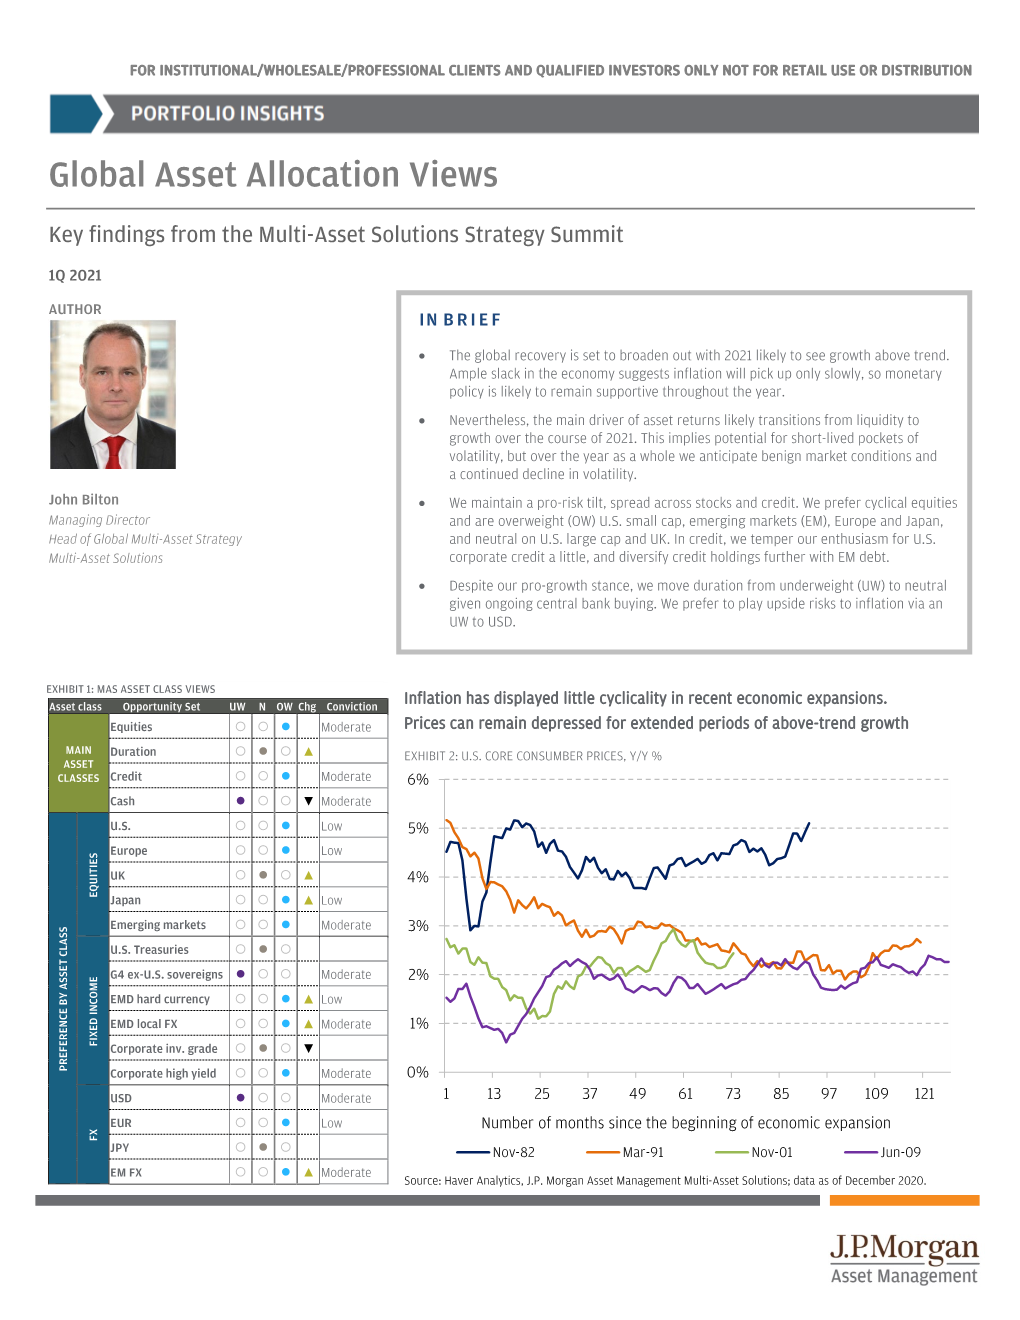 Extended 1Q 2021 Global Asset Allocation Views